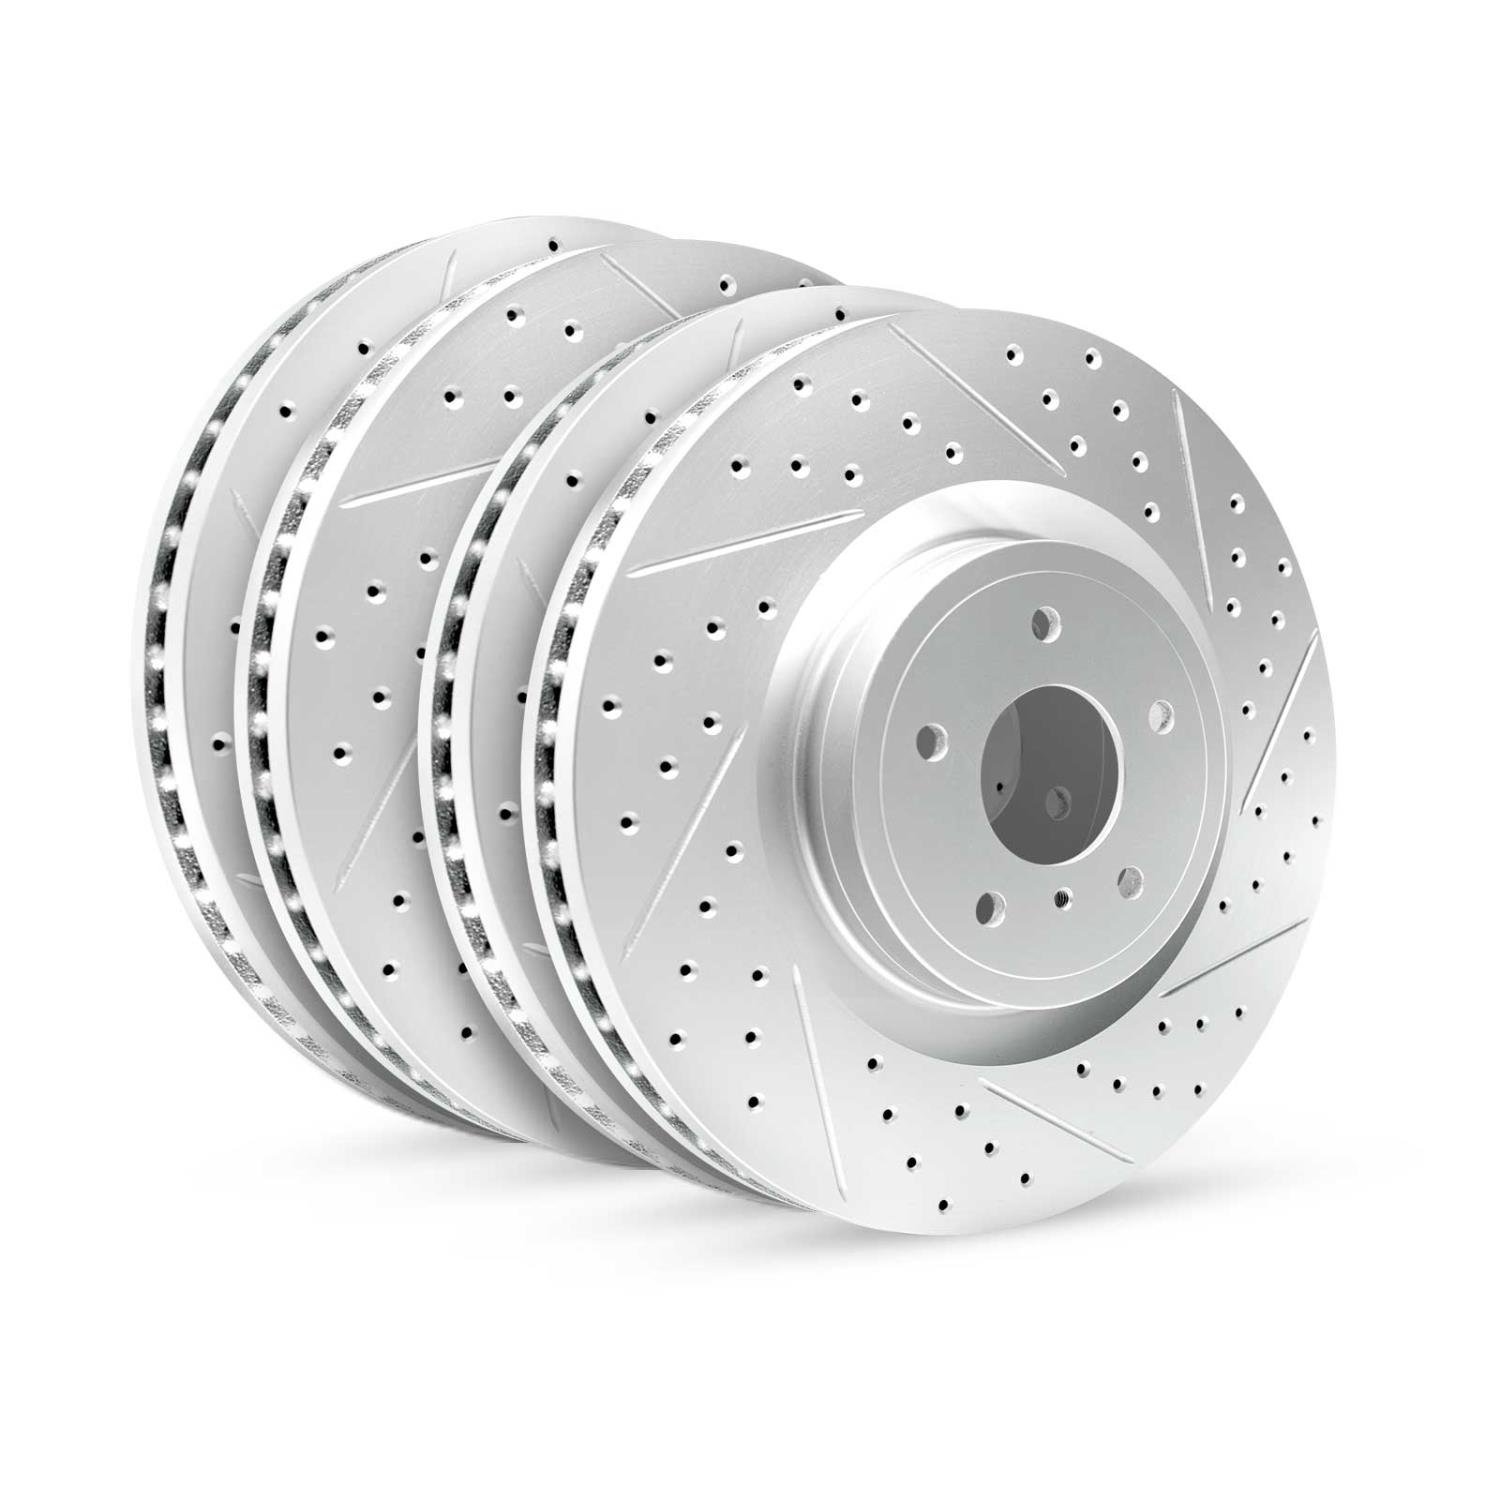 GEO-Carbon Drilled/Slotted Rotors, 2013-2020 BMW, Position: